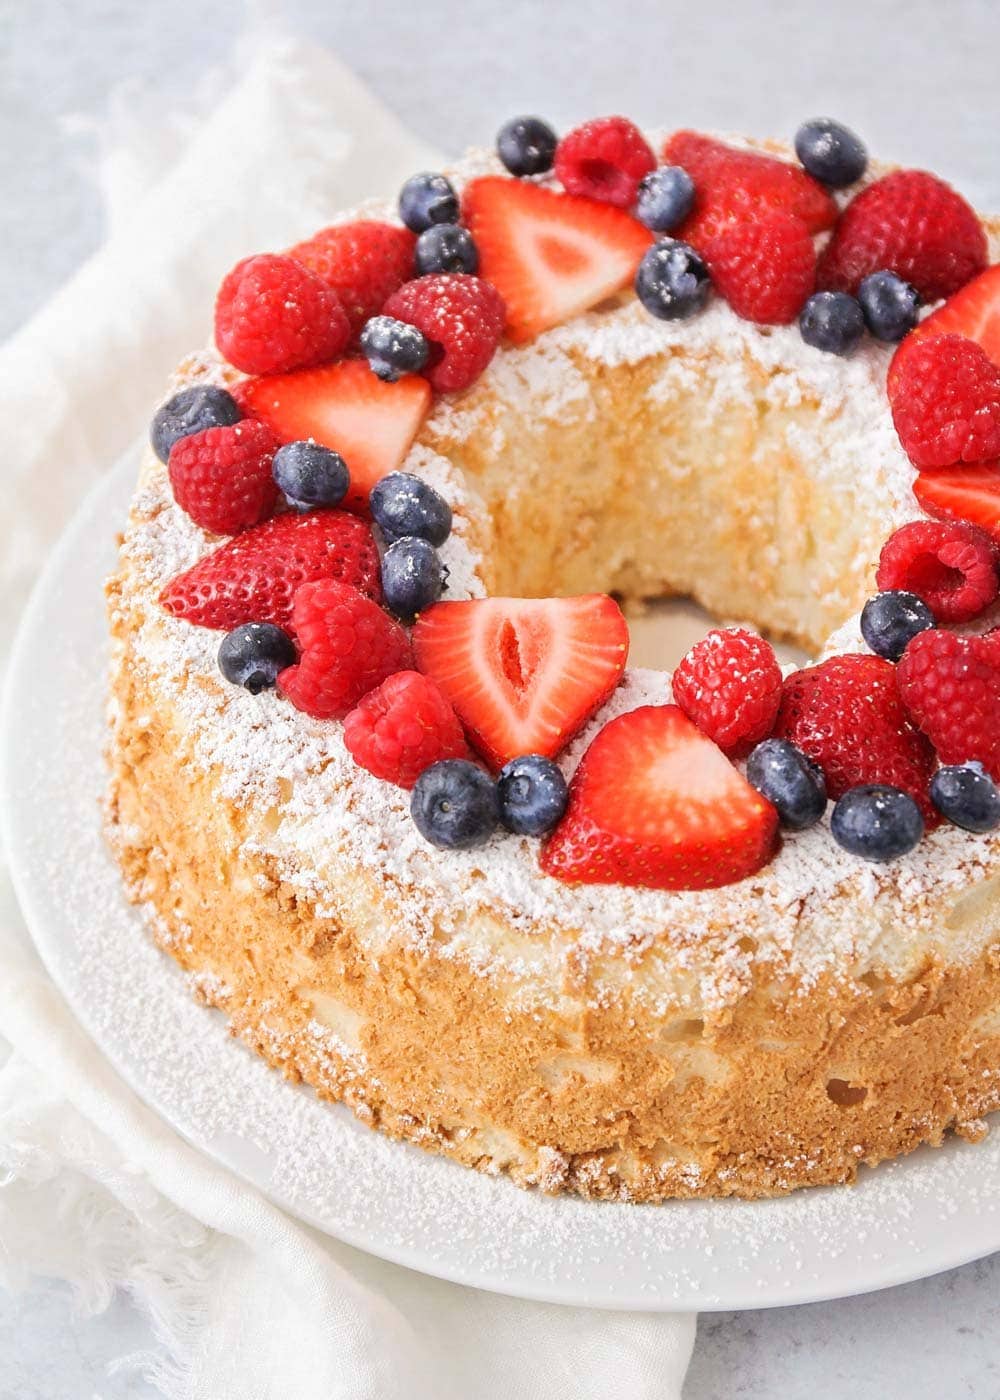 Cakes That Use Lots of Eggs: Identifying Egg-Heavy Cake Recipes